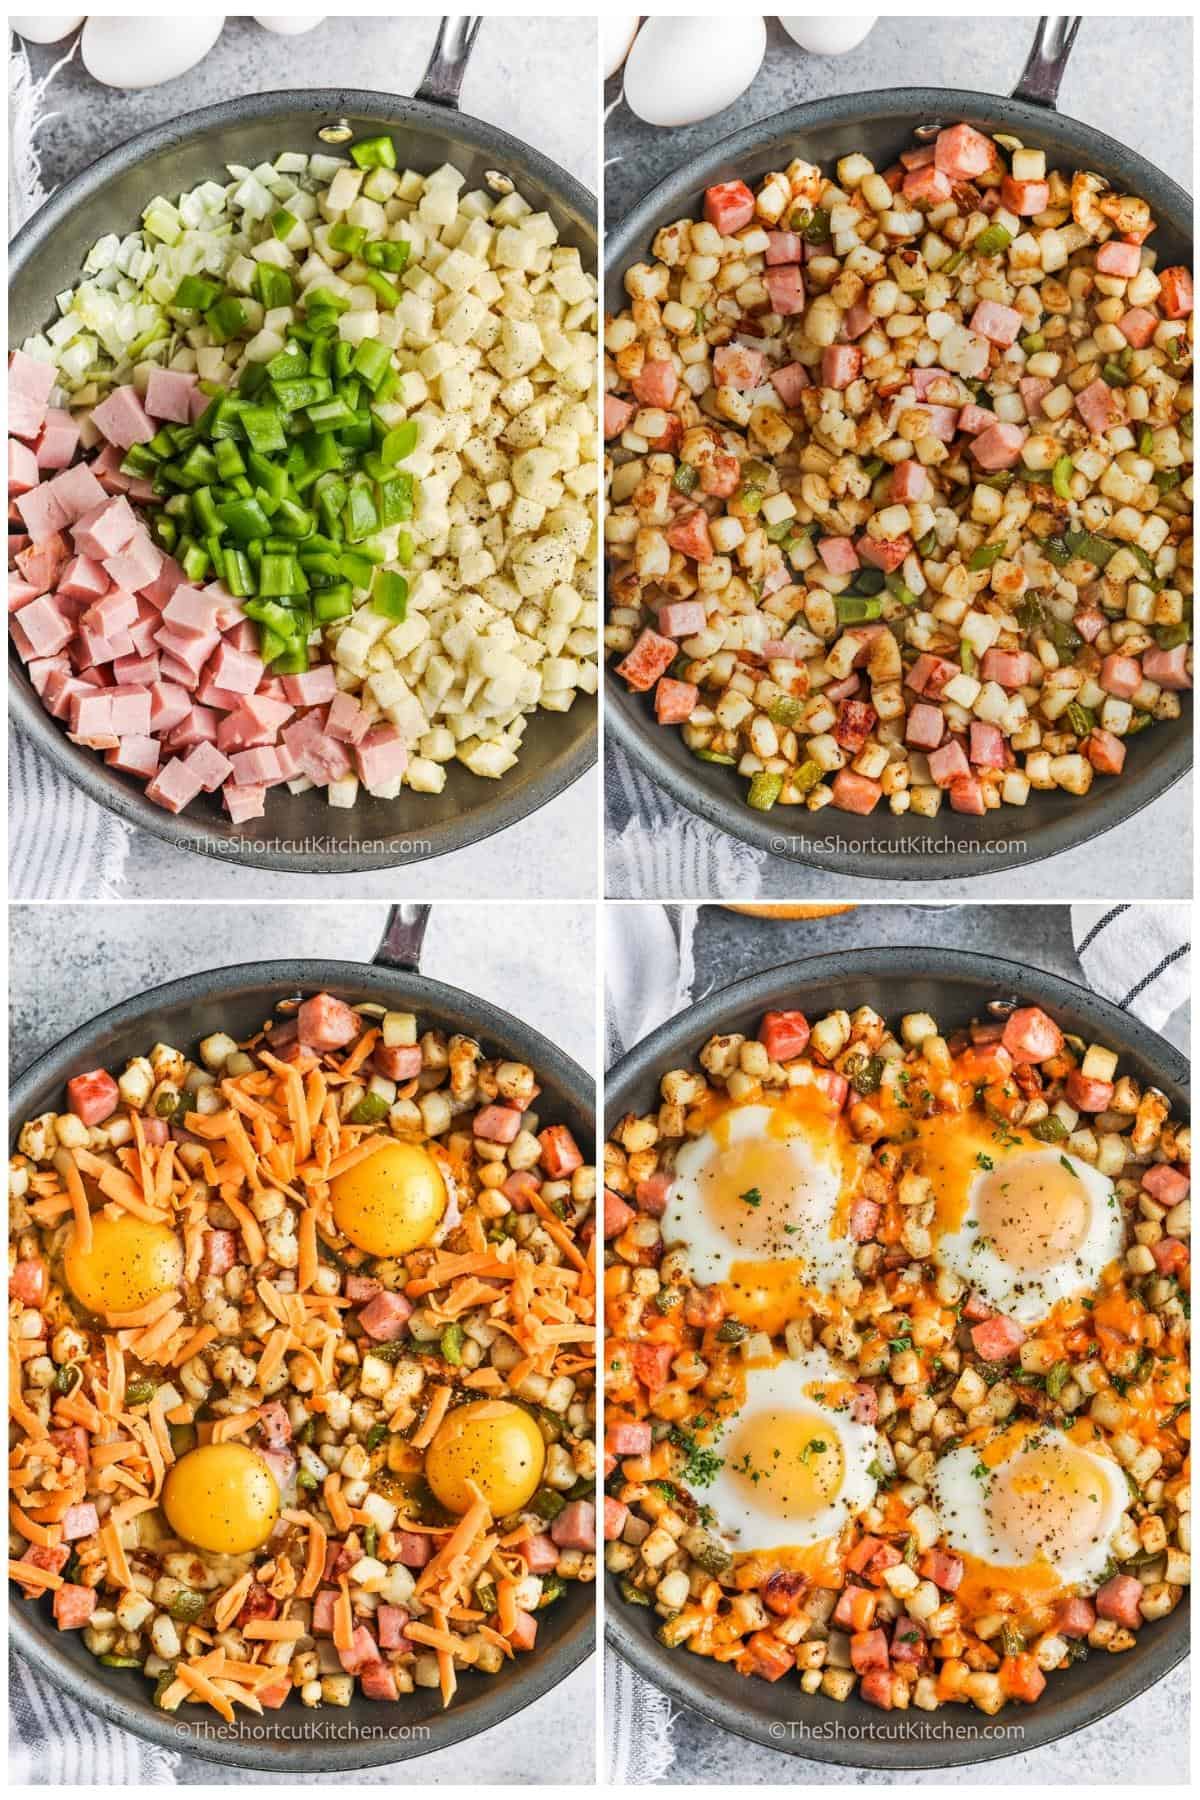 process of adding ingredients together to make Breakfast Hash With Ham